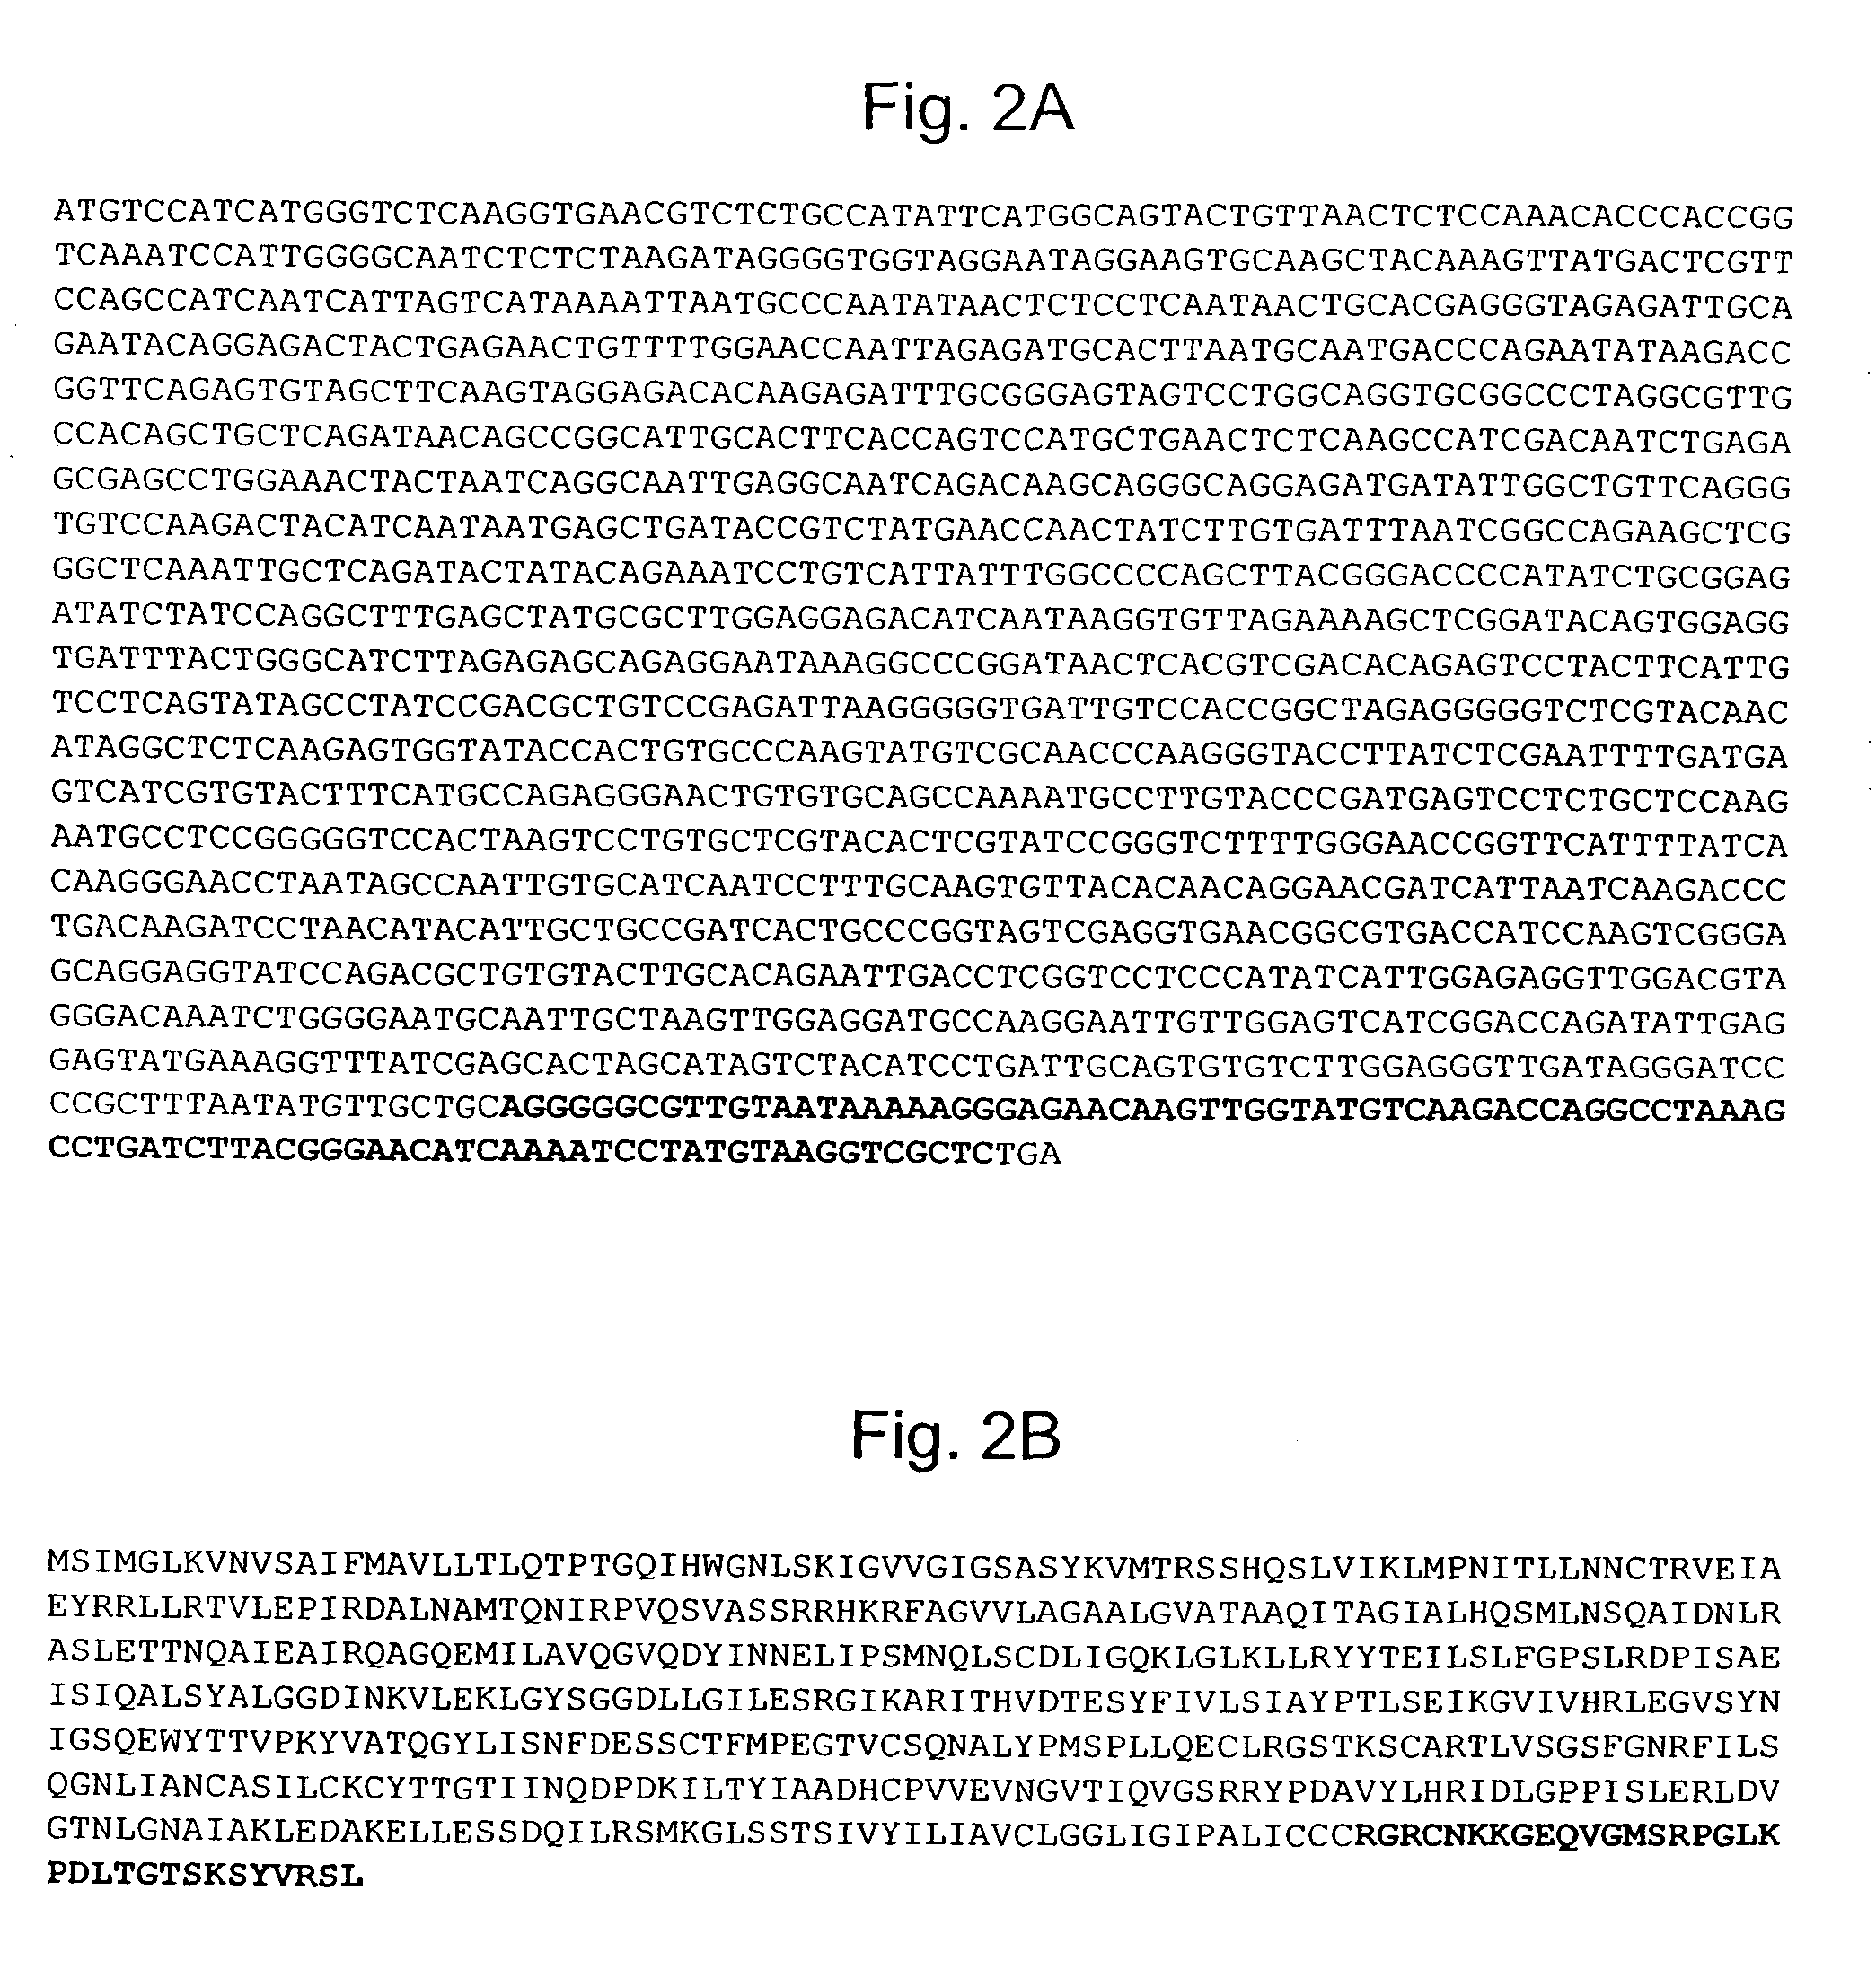 Pseudotyping of retroviral vectors, methods for production and use thereof for targeted gene transfer and high throughput screening